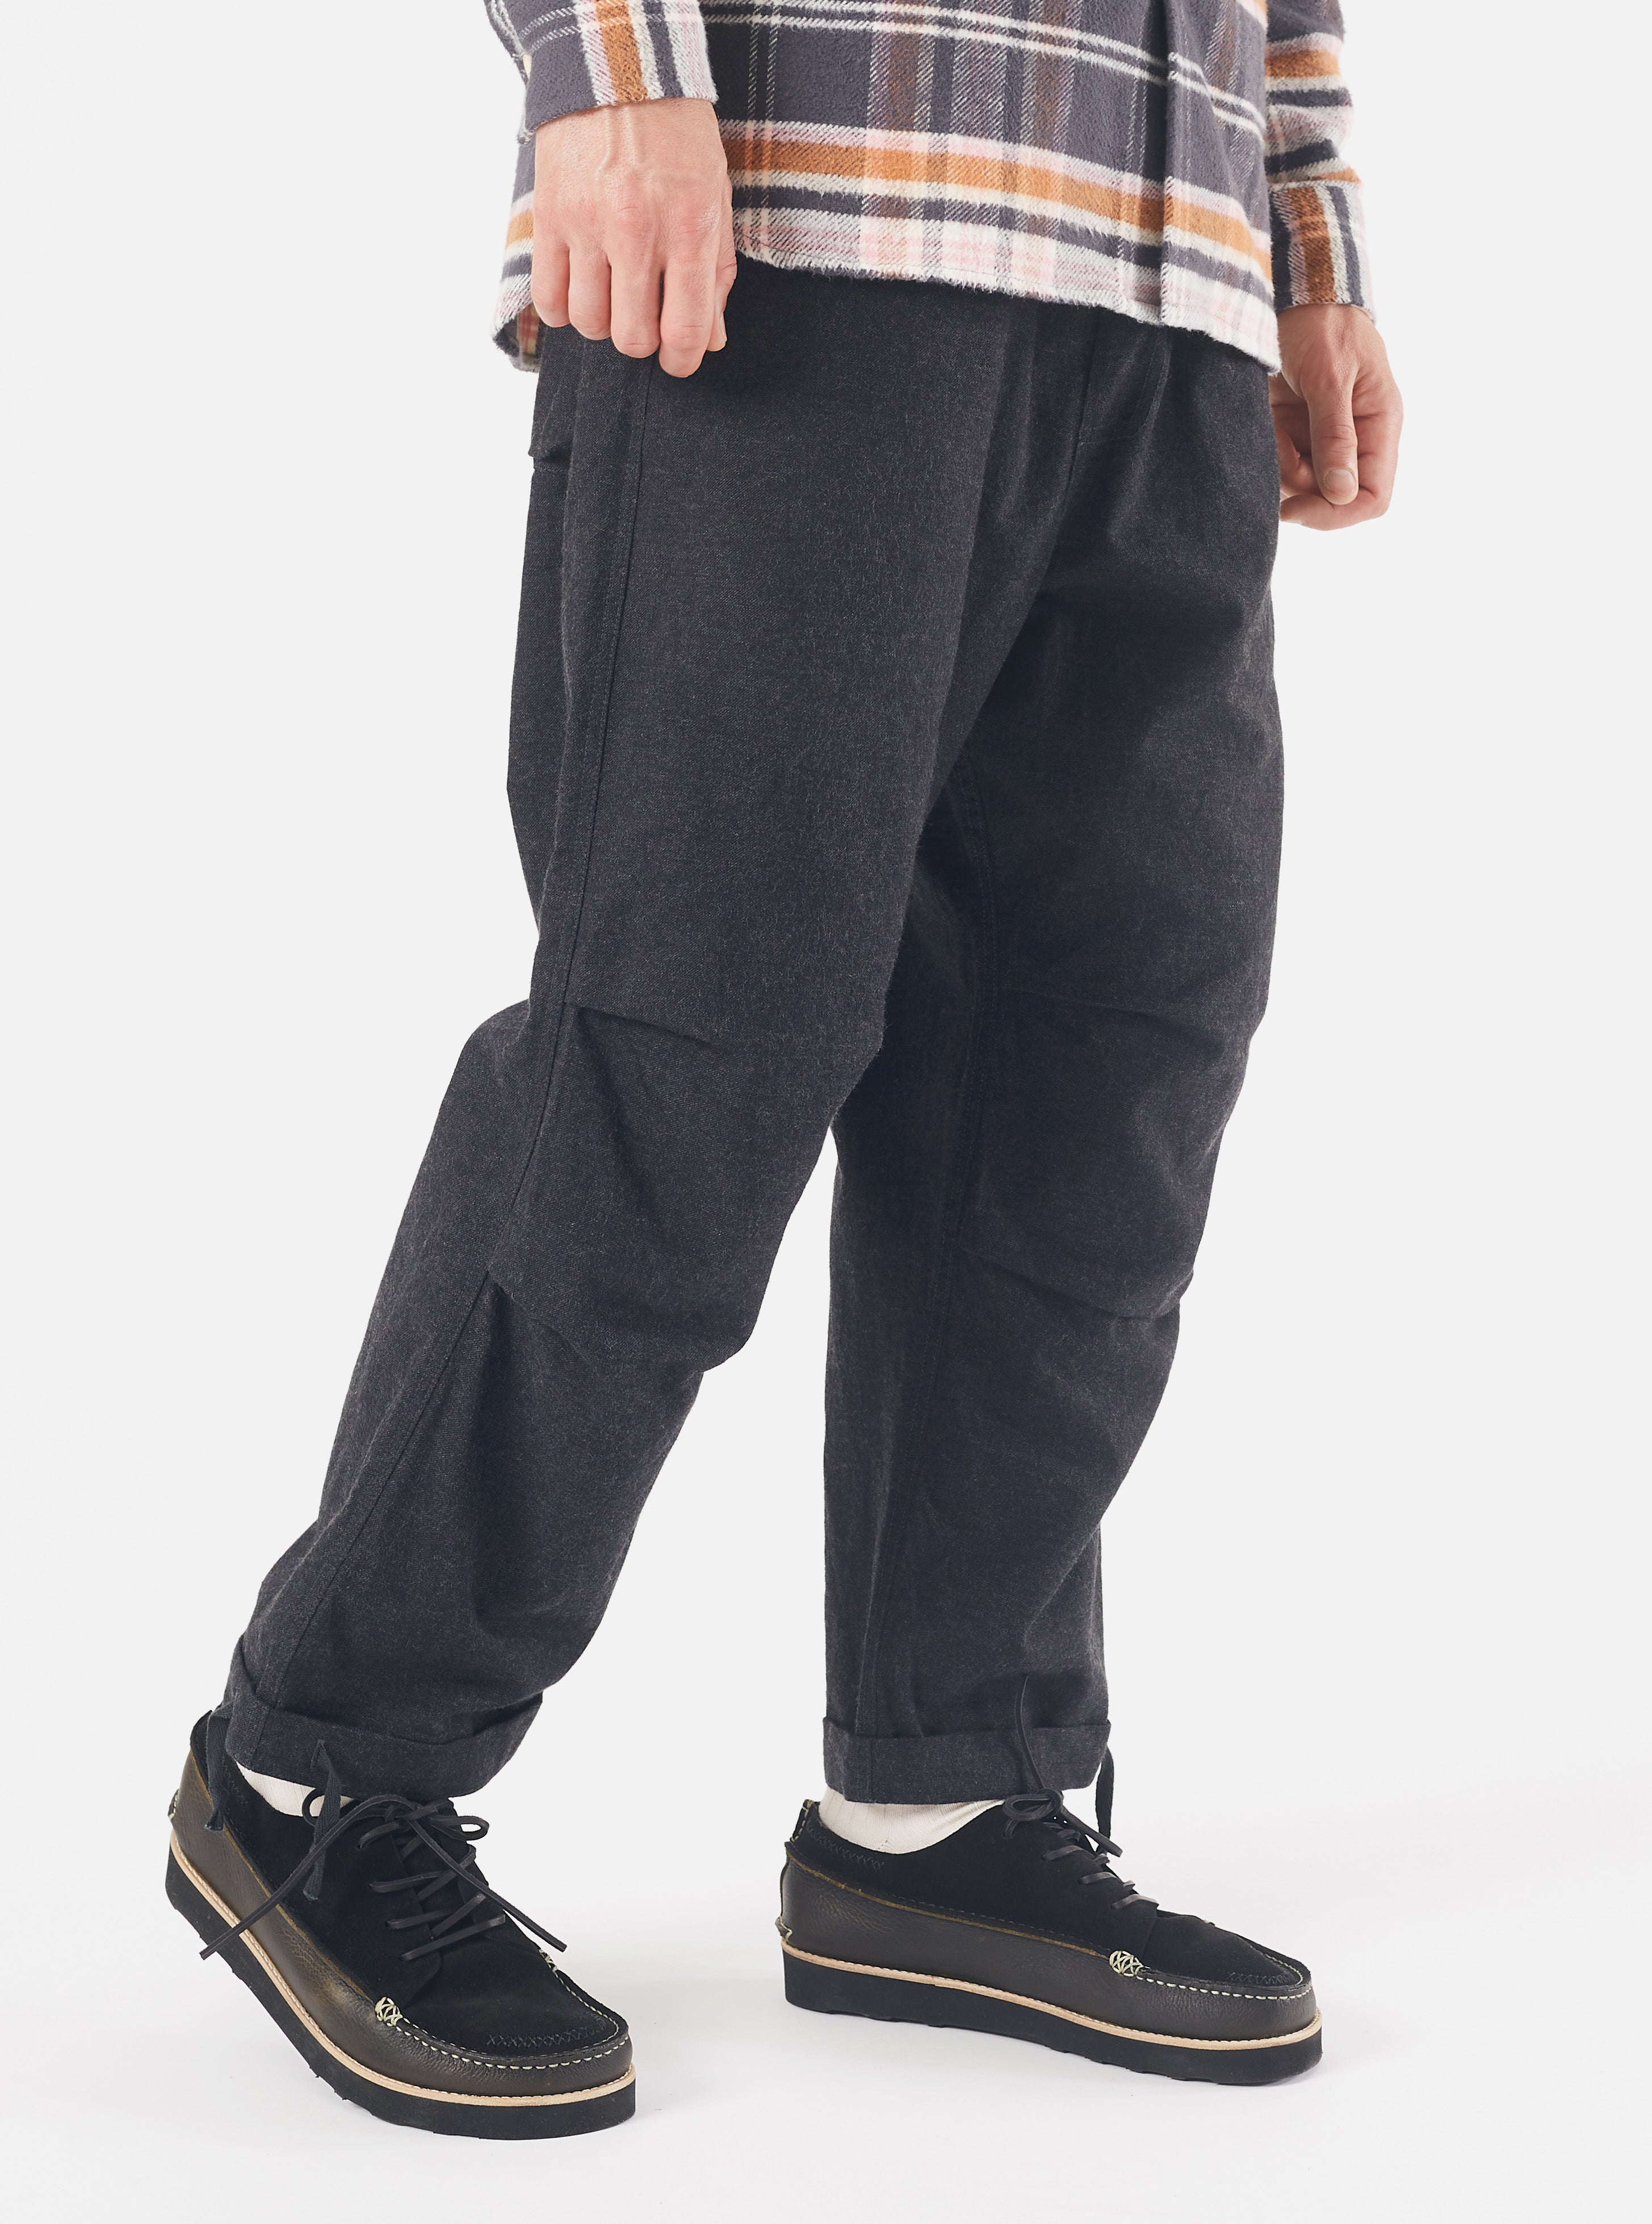 Universal Works Parachute Pant in Charcoal Carbon Cotton